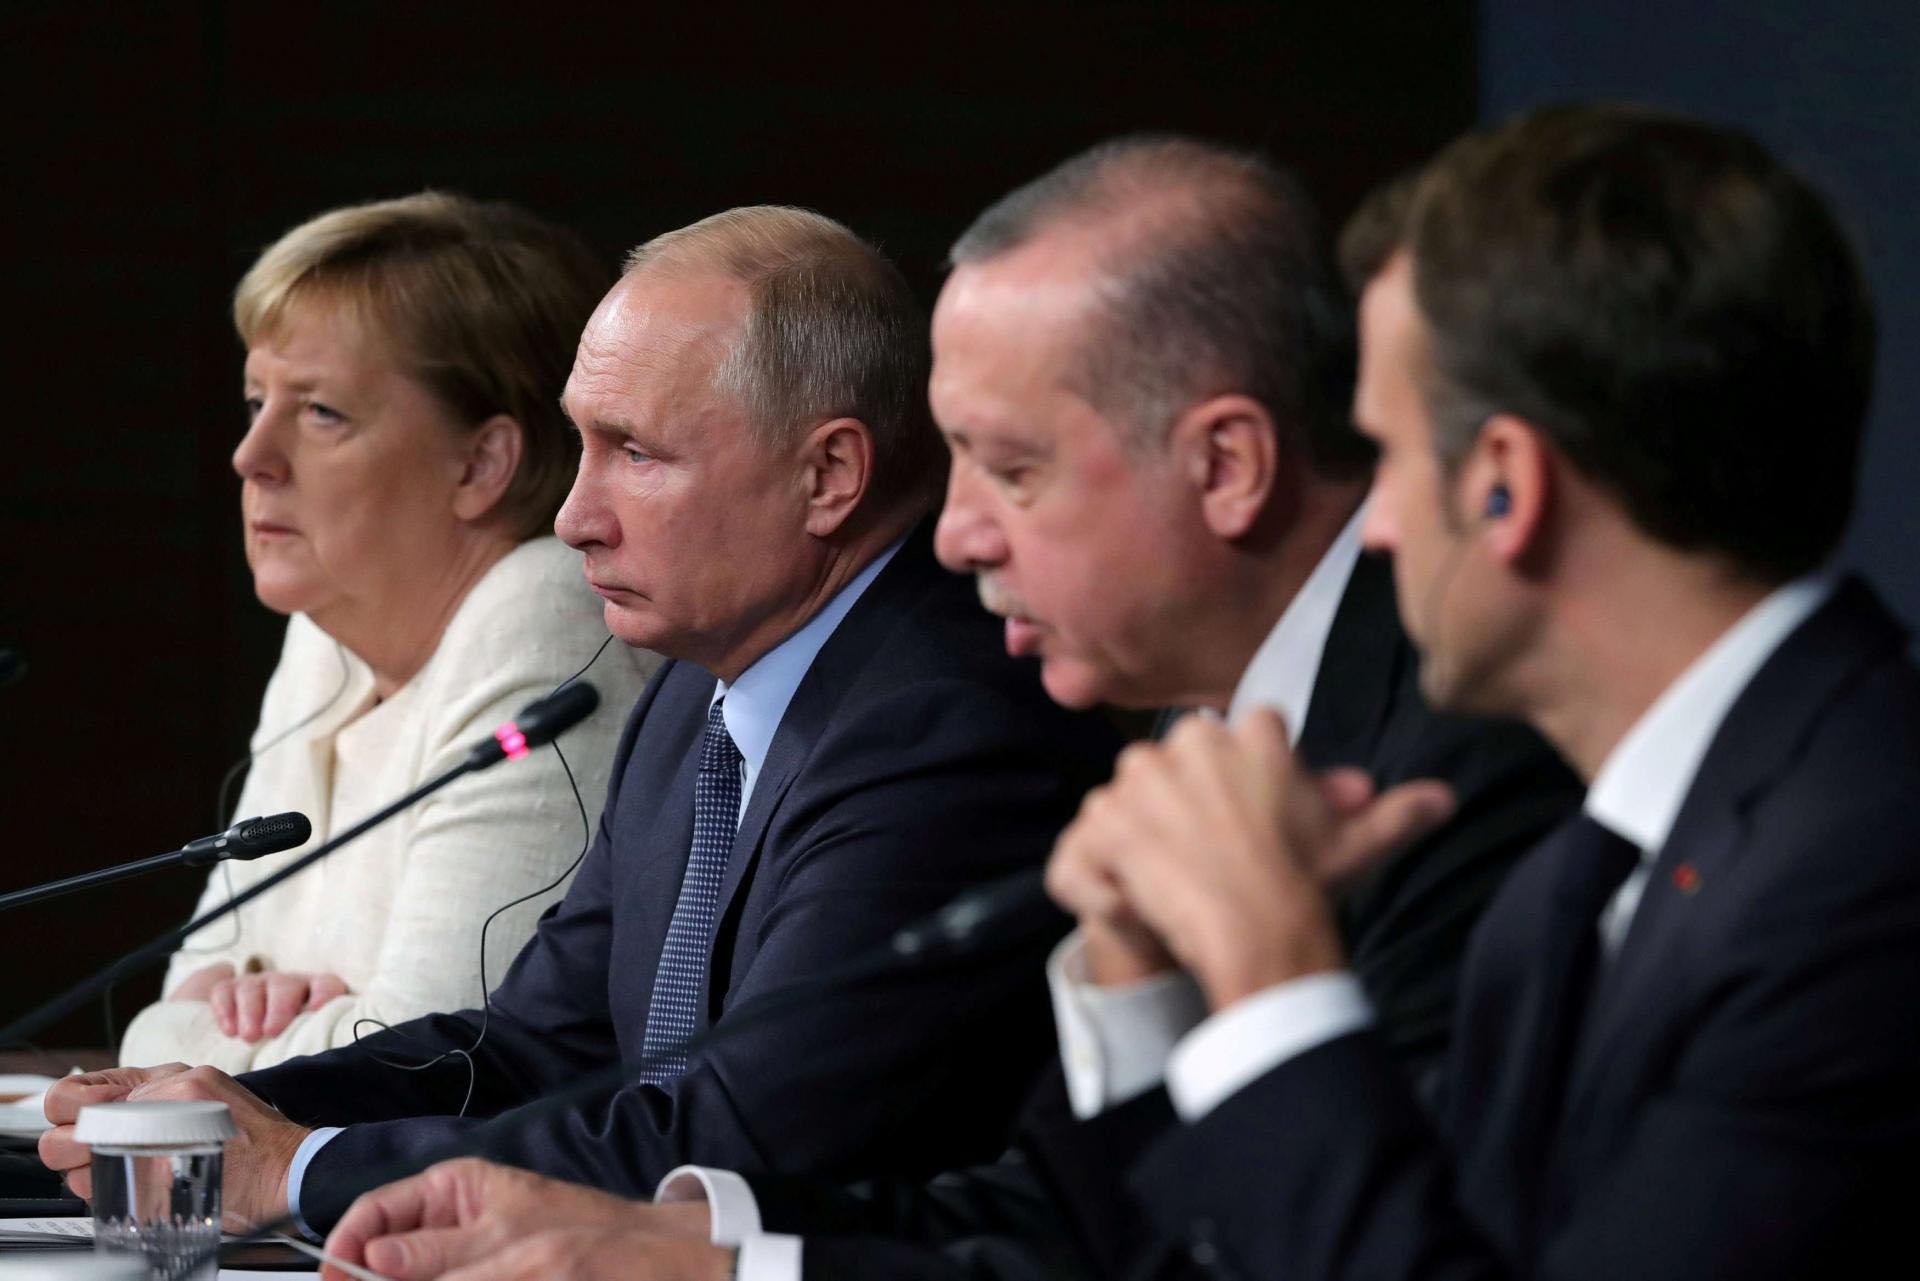 The leaders of Russia, Turkey, Germany and France have called for the committee to be formed by the end of the year